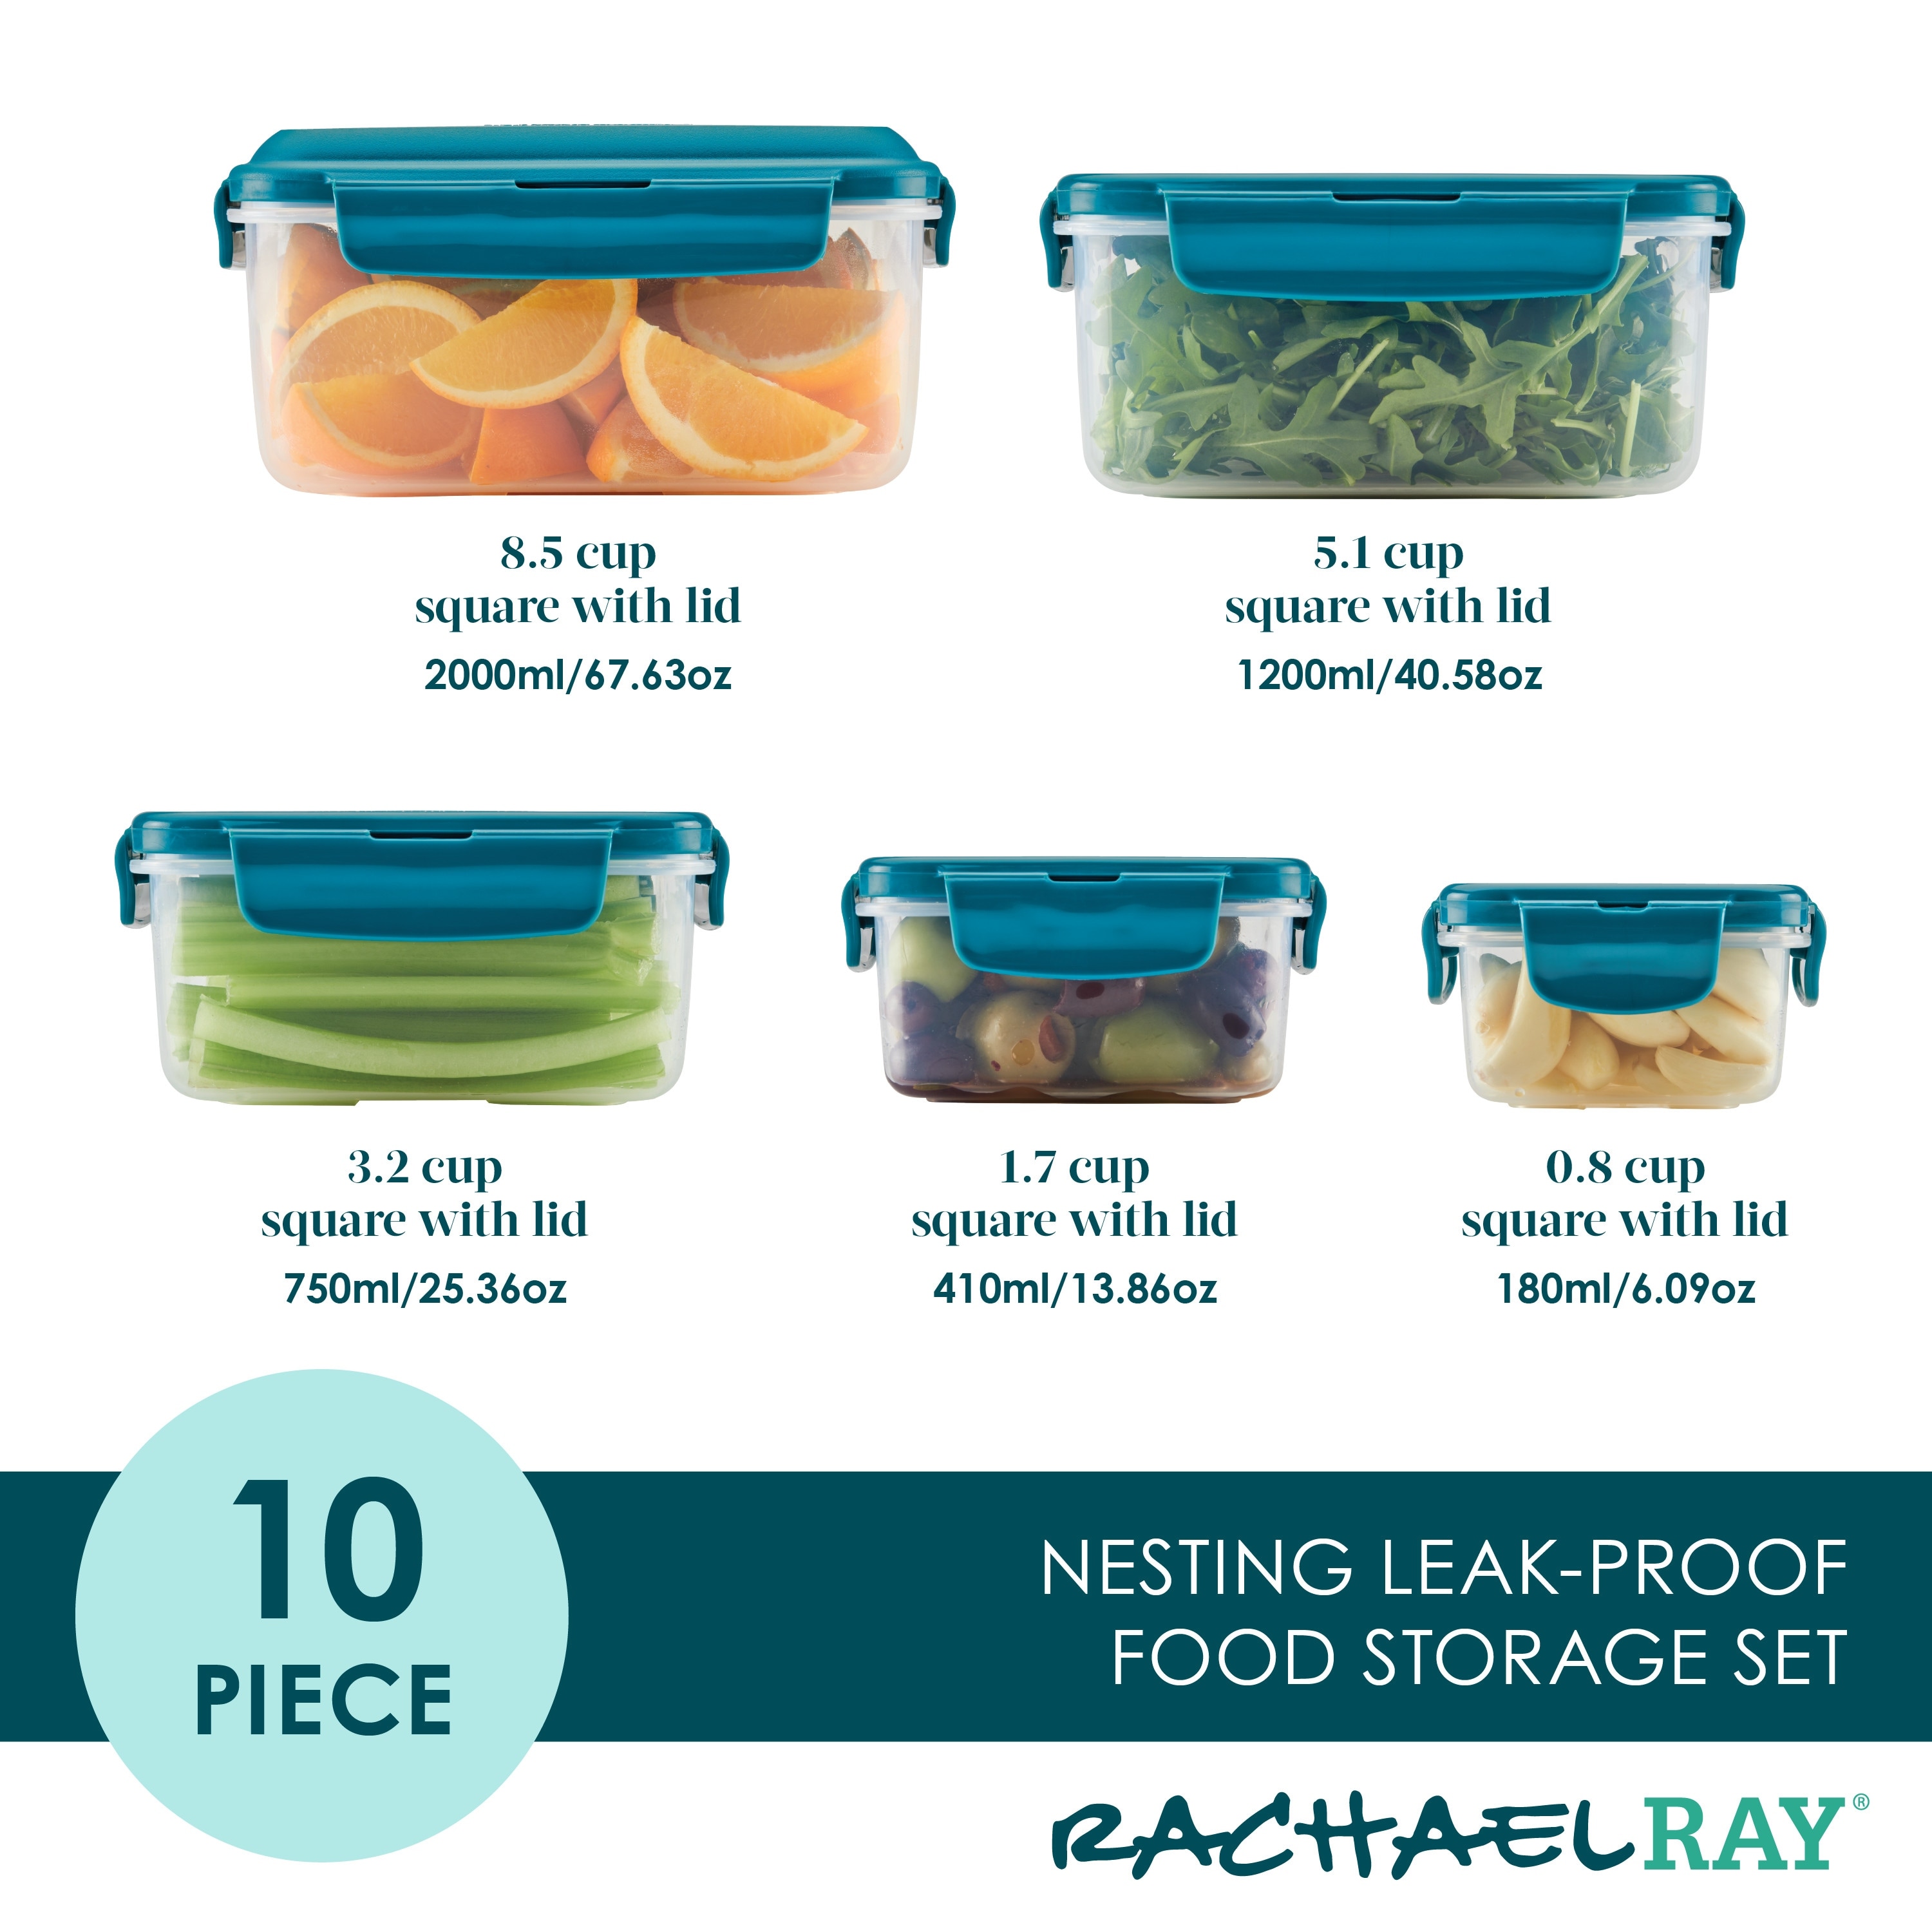 https://ak1.ostkcdn.com/images/products/is/images/direct/c1e6aac4aceccd711b843efb657635f67fad374a/Rachael-Ray-Leak-Proof-Nestable-Square-Food-Storage-Set%2C-10pc.jpg